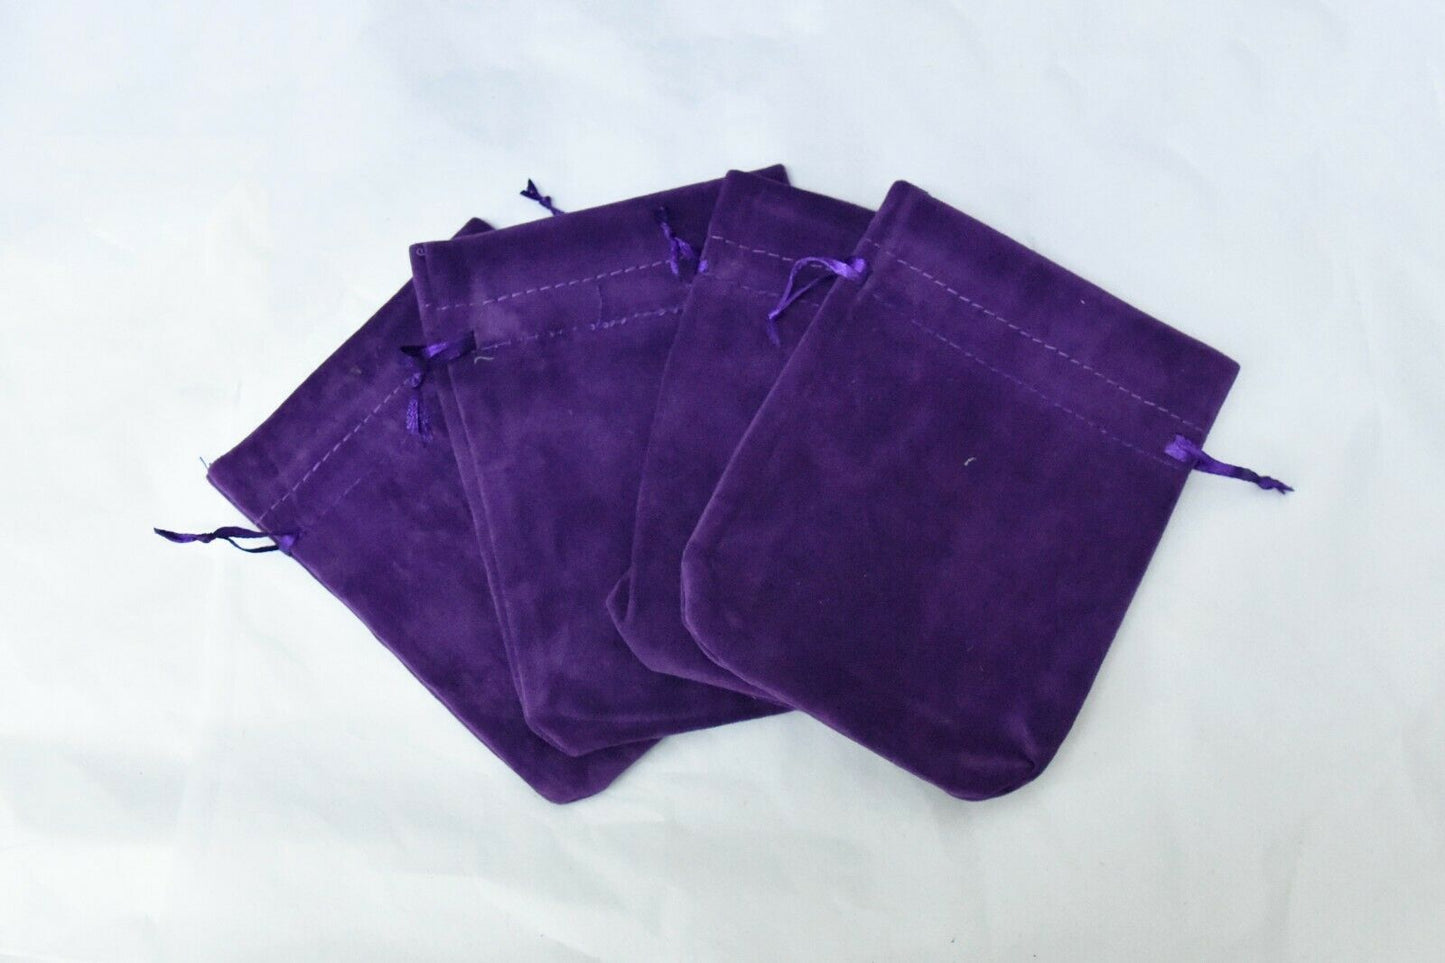 Soft Velvet Purple Drawstring Gift Pouch for Jewelry Gifts and Coins 13x10cm